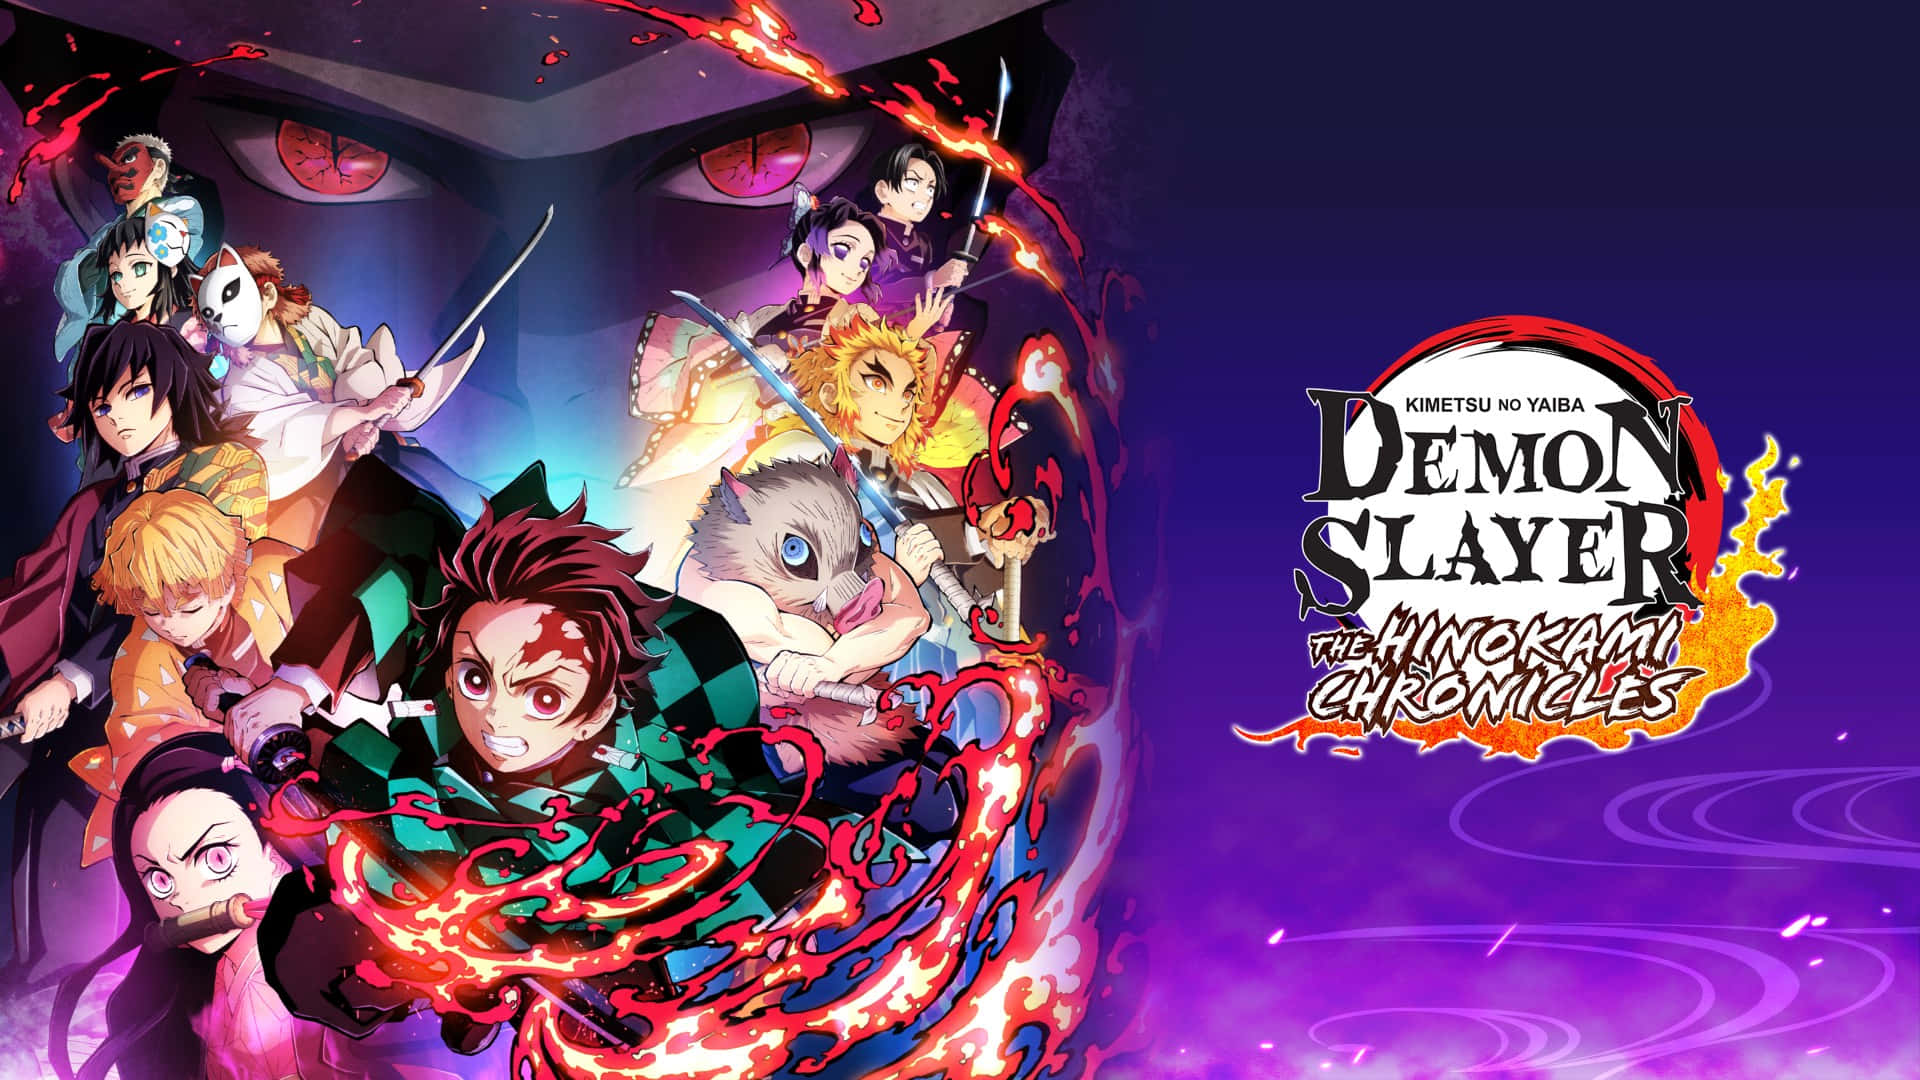 How to Watch Demon Slayer Season 3 Episode 2 Demon Slayer Season 3 Episode  2 Here are release date how to watch what to expect and more  The  Economic Times